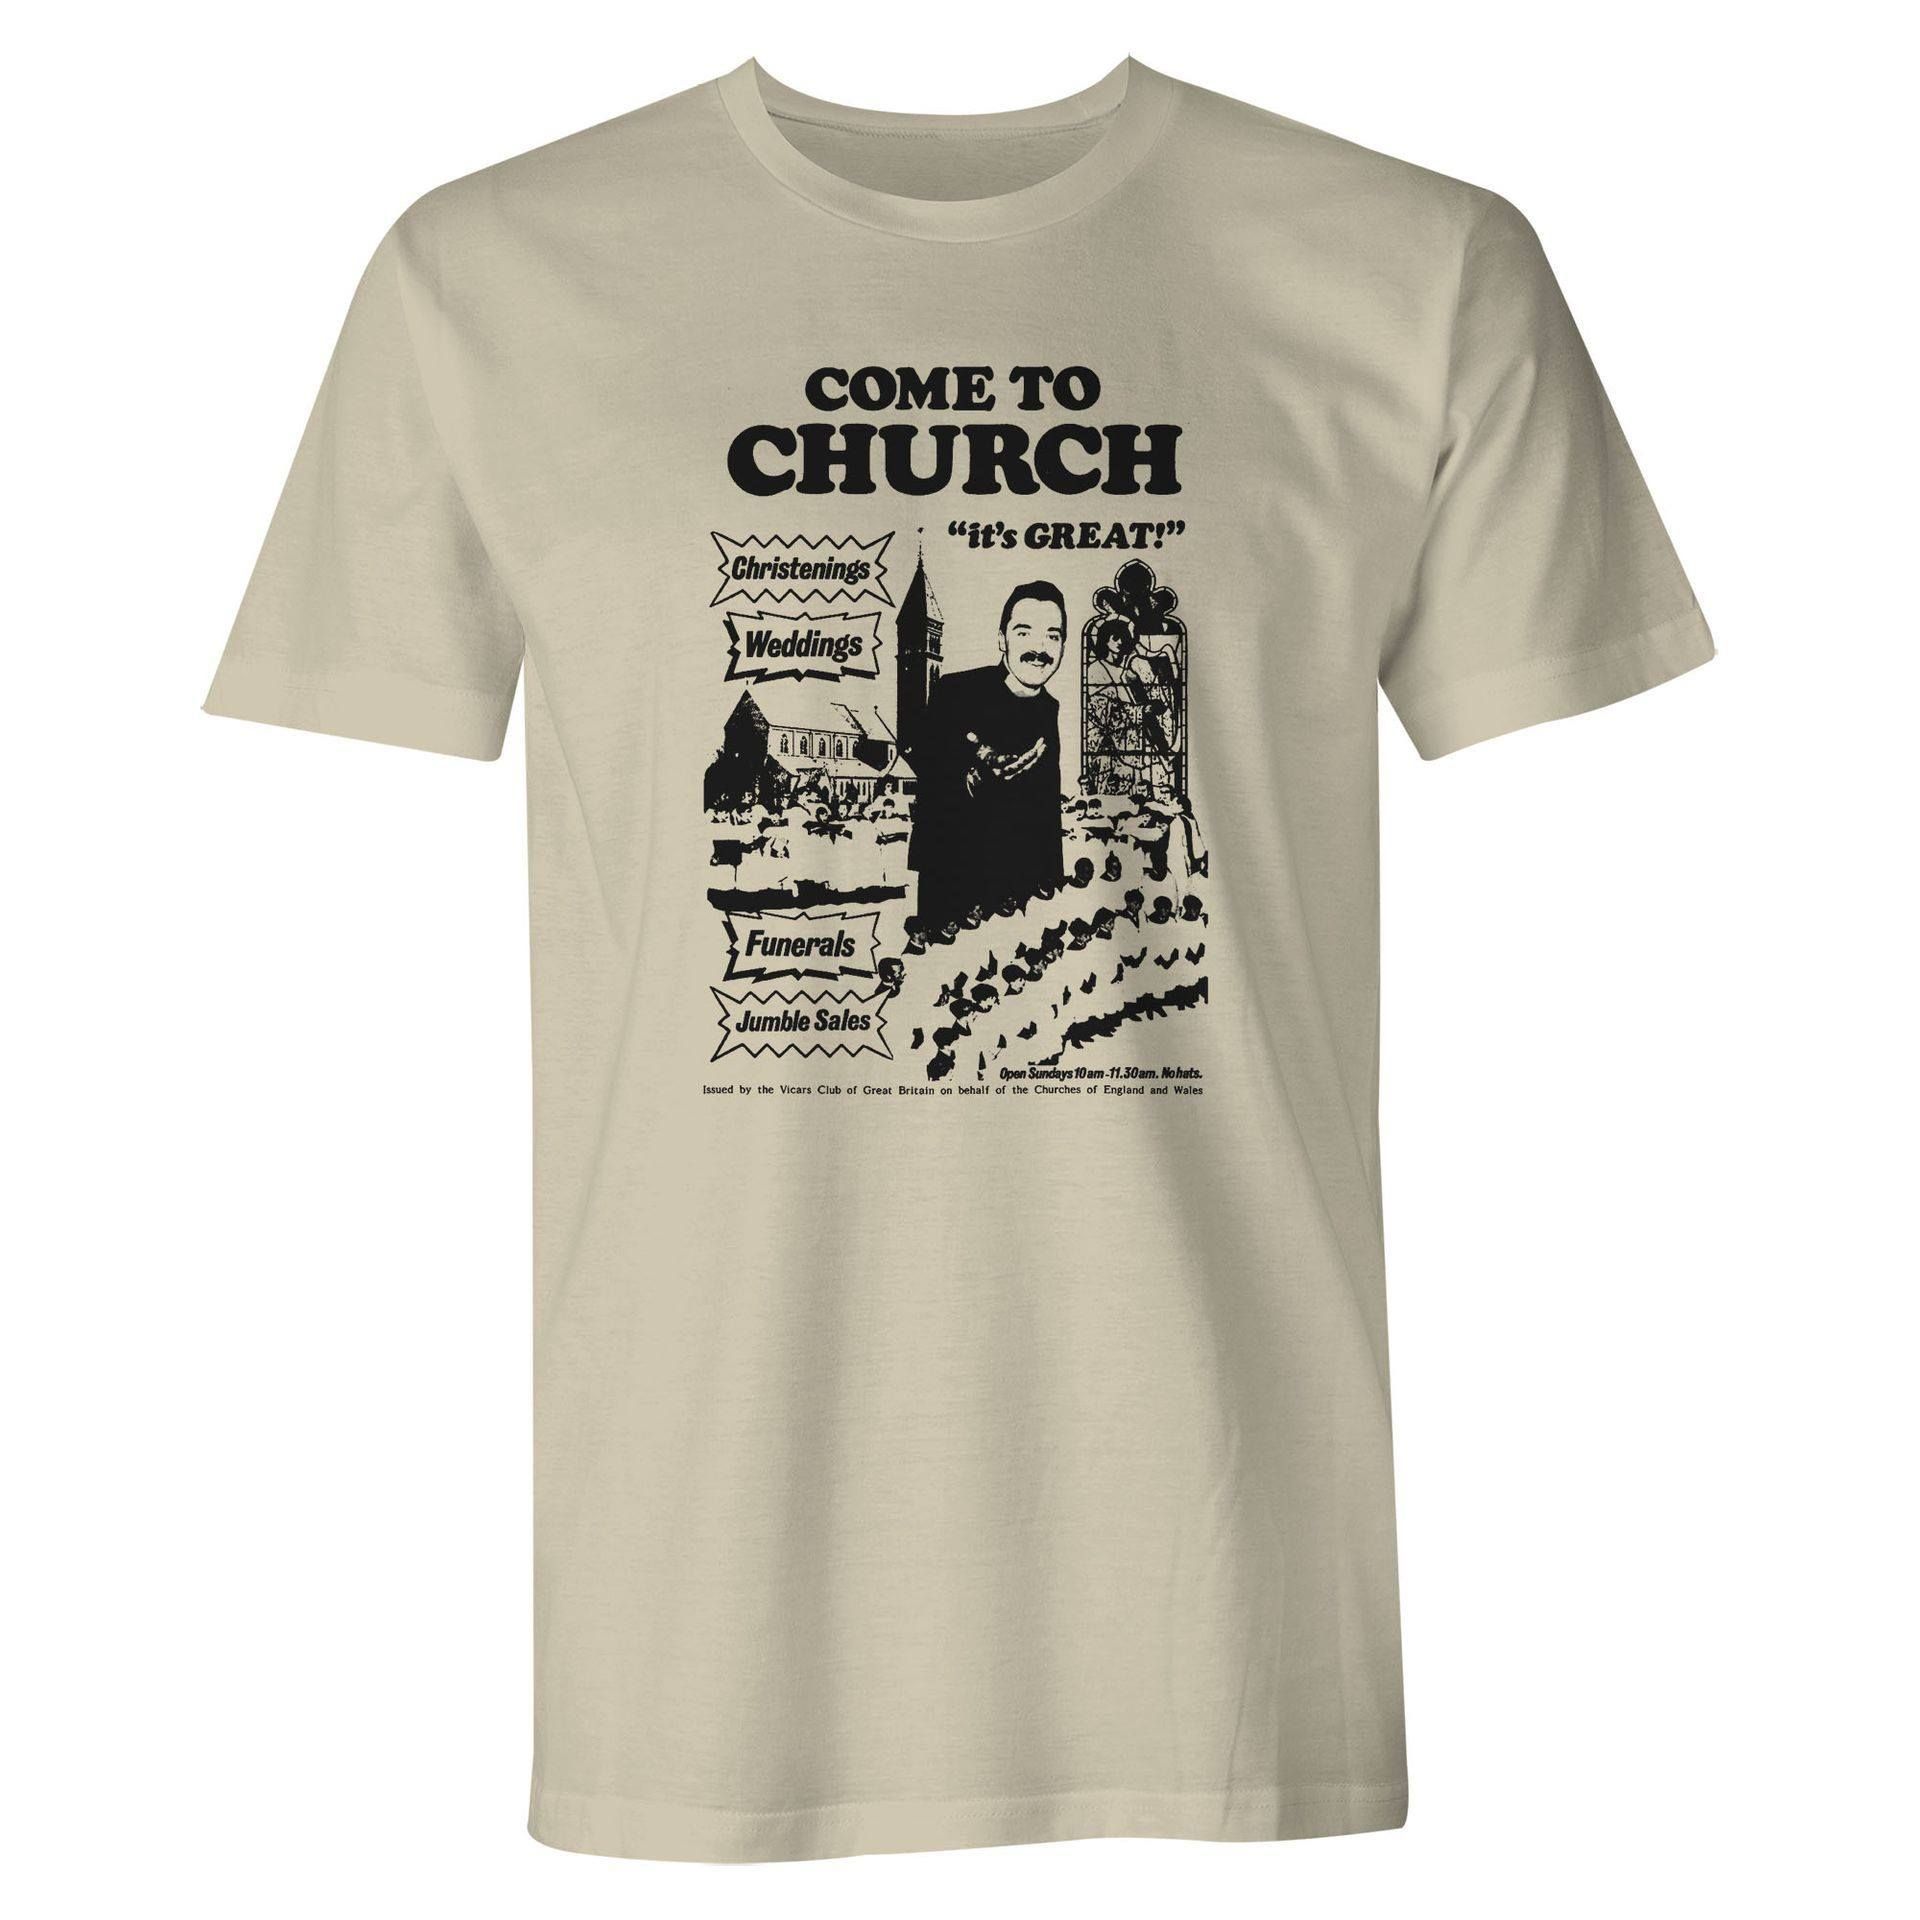 Come to church – It’s great, christenings, weddings